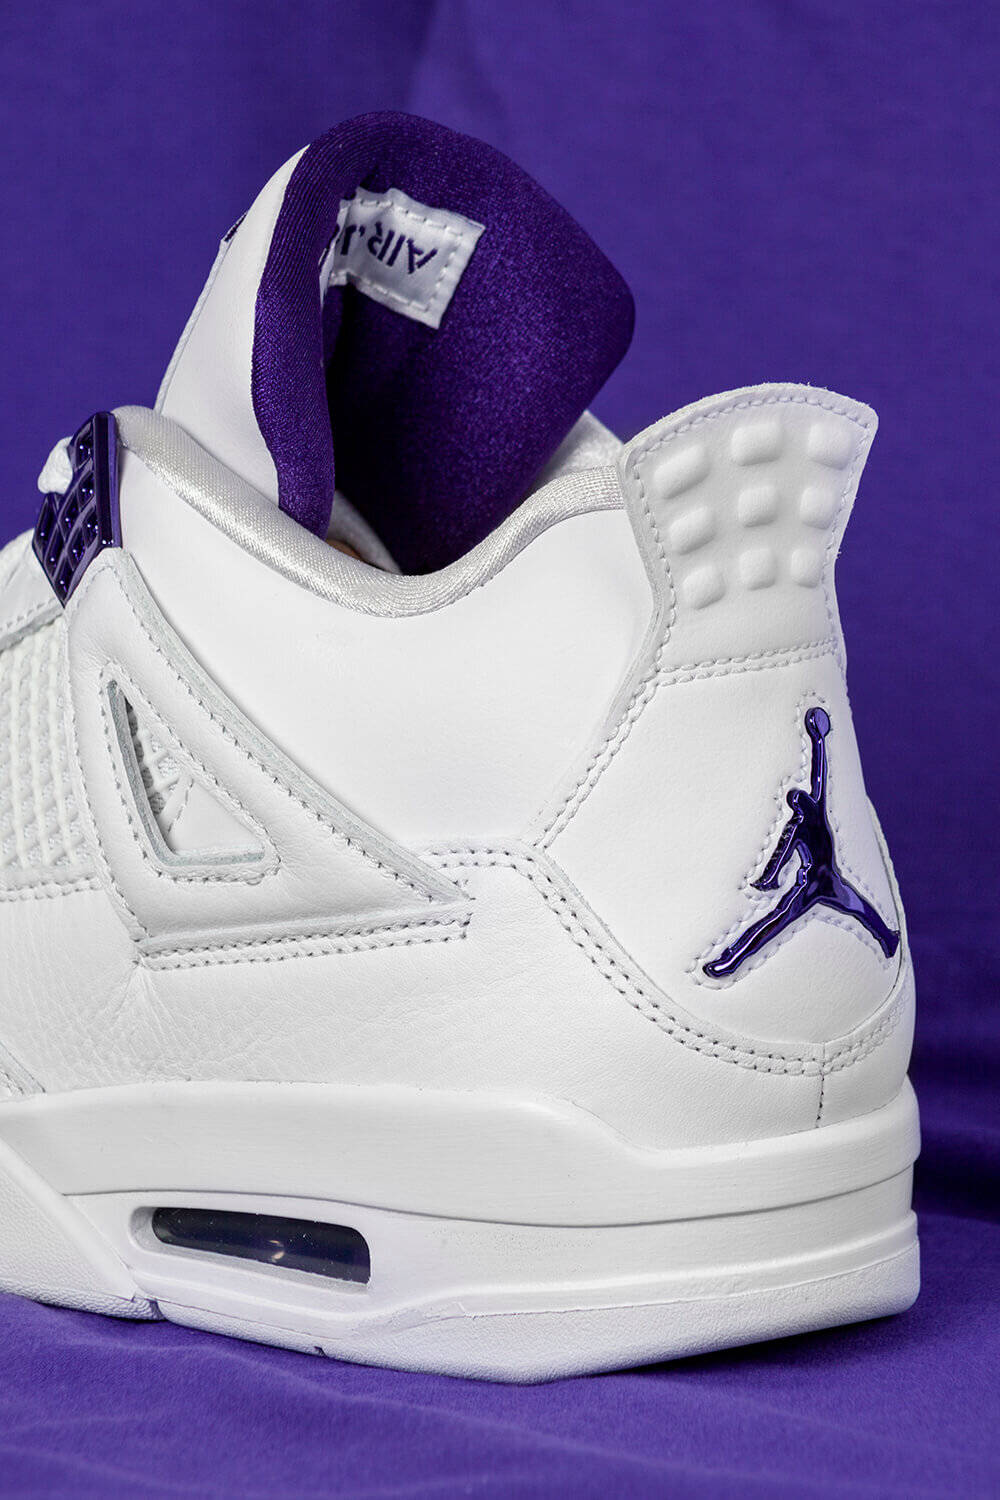 Fly to new heights with Purple Jordan Wallpaper